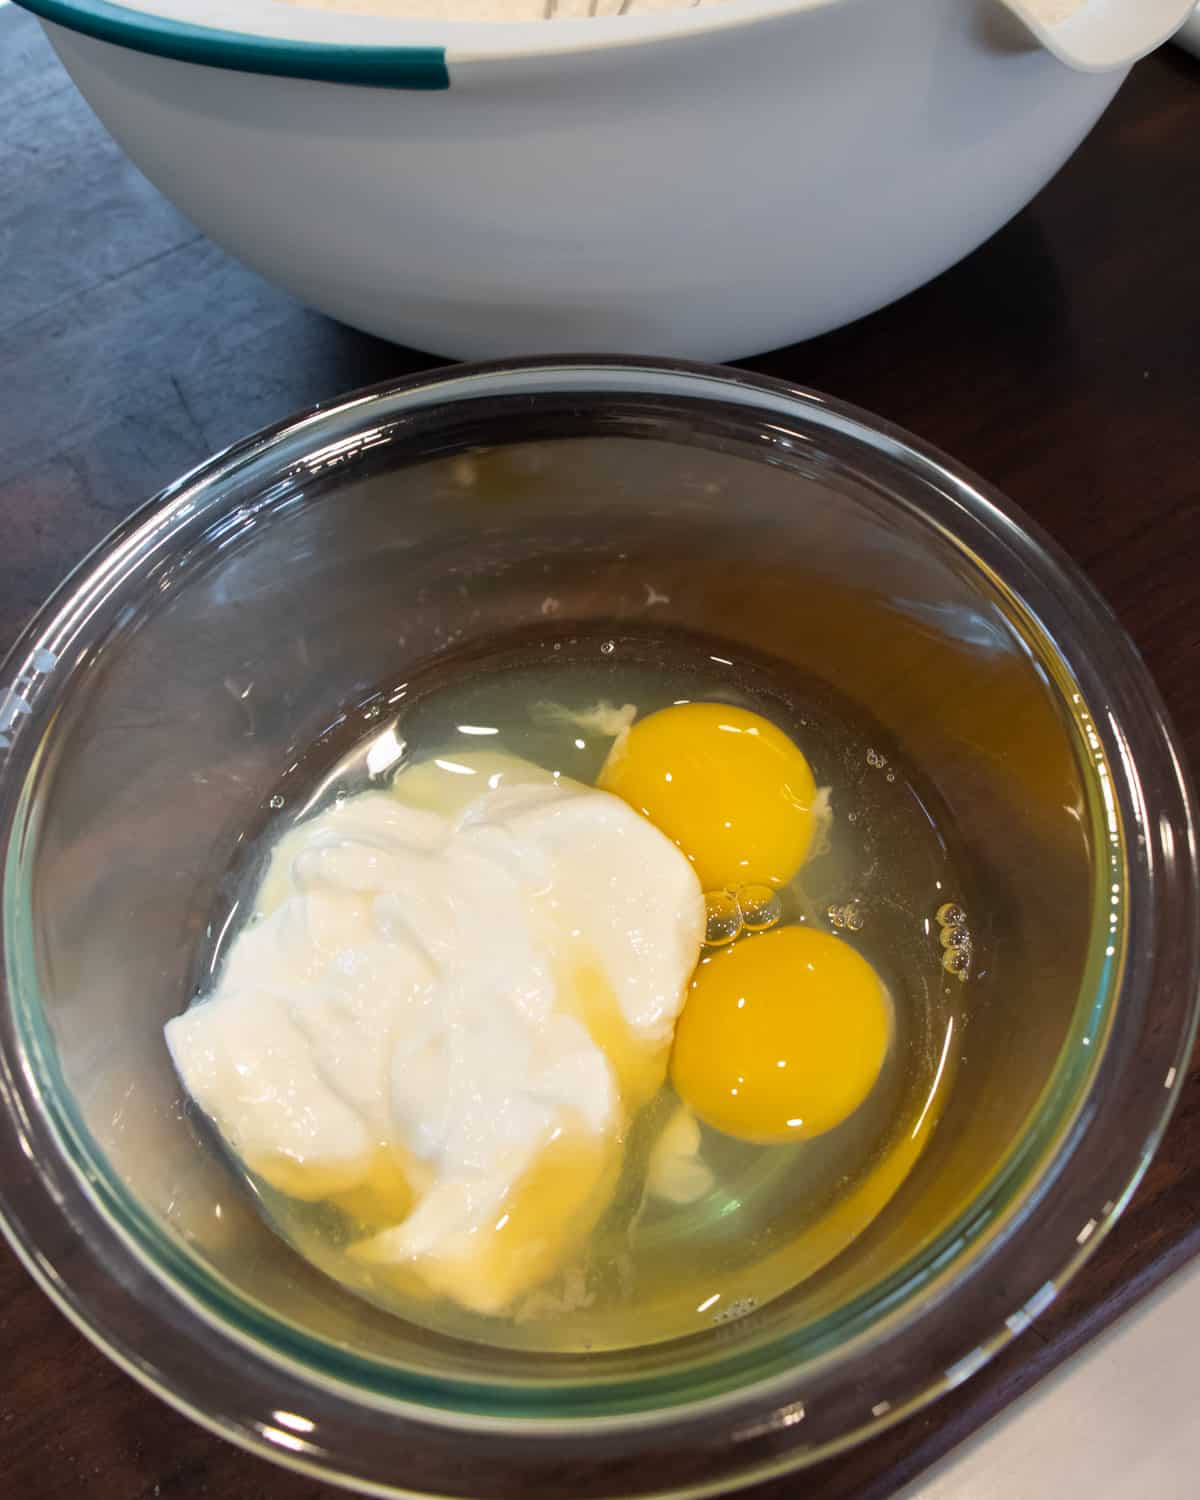 A glass mixing bowl with eggs and sour cream.